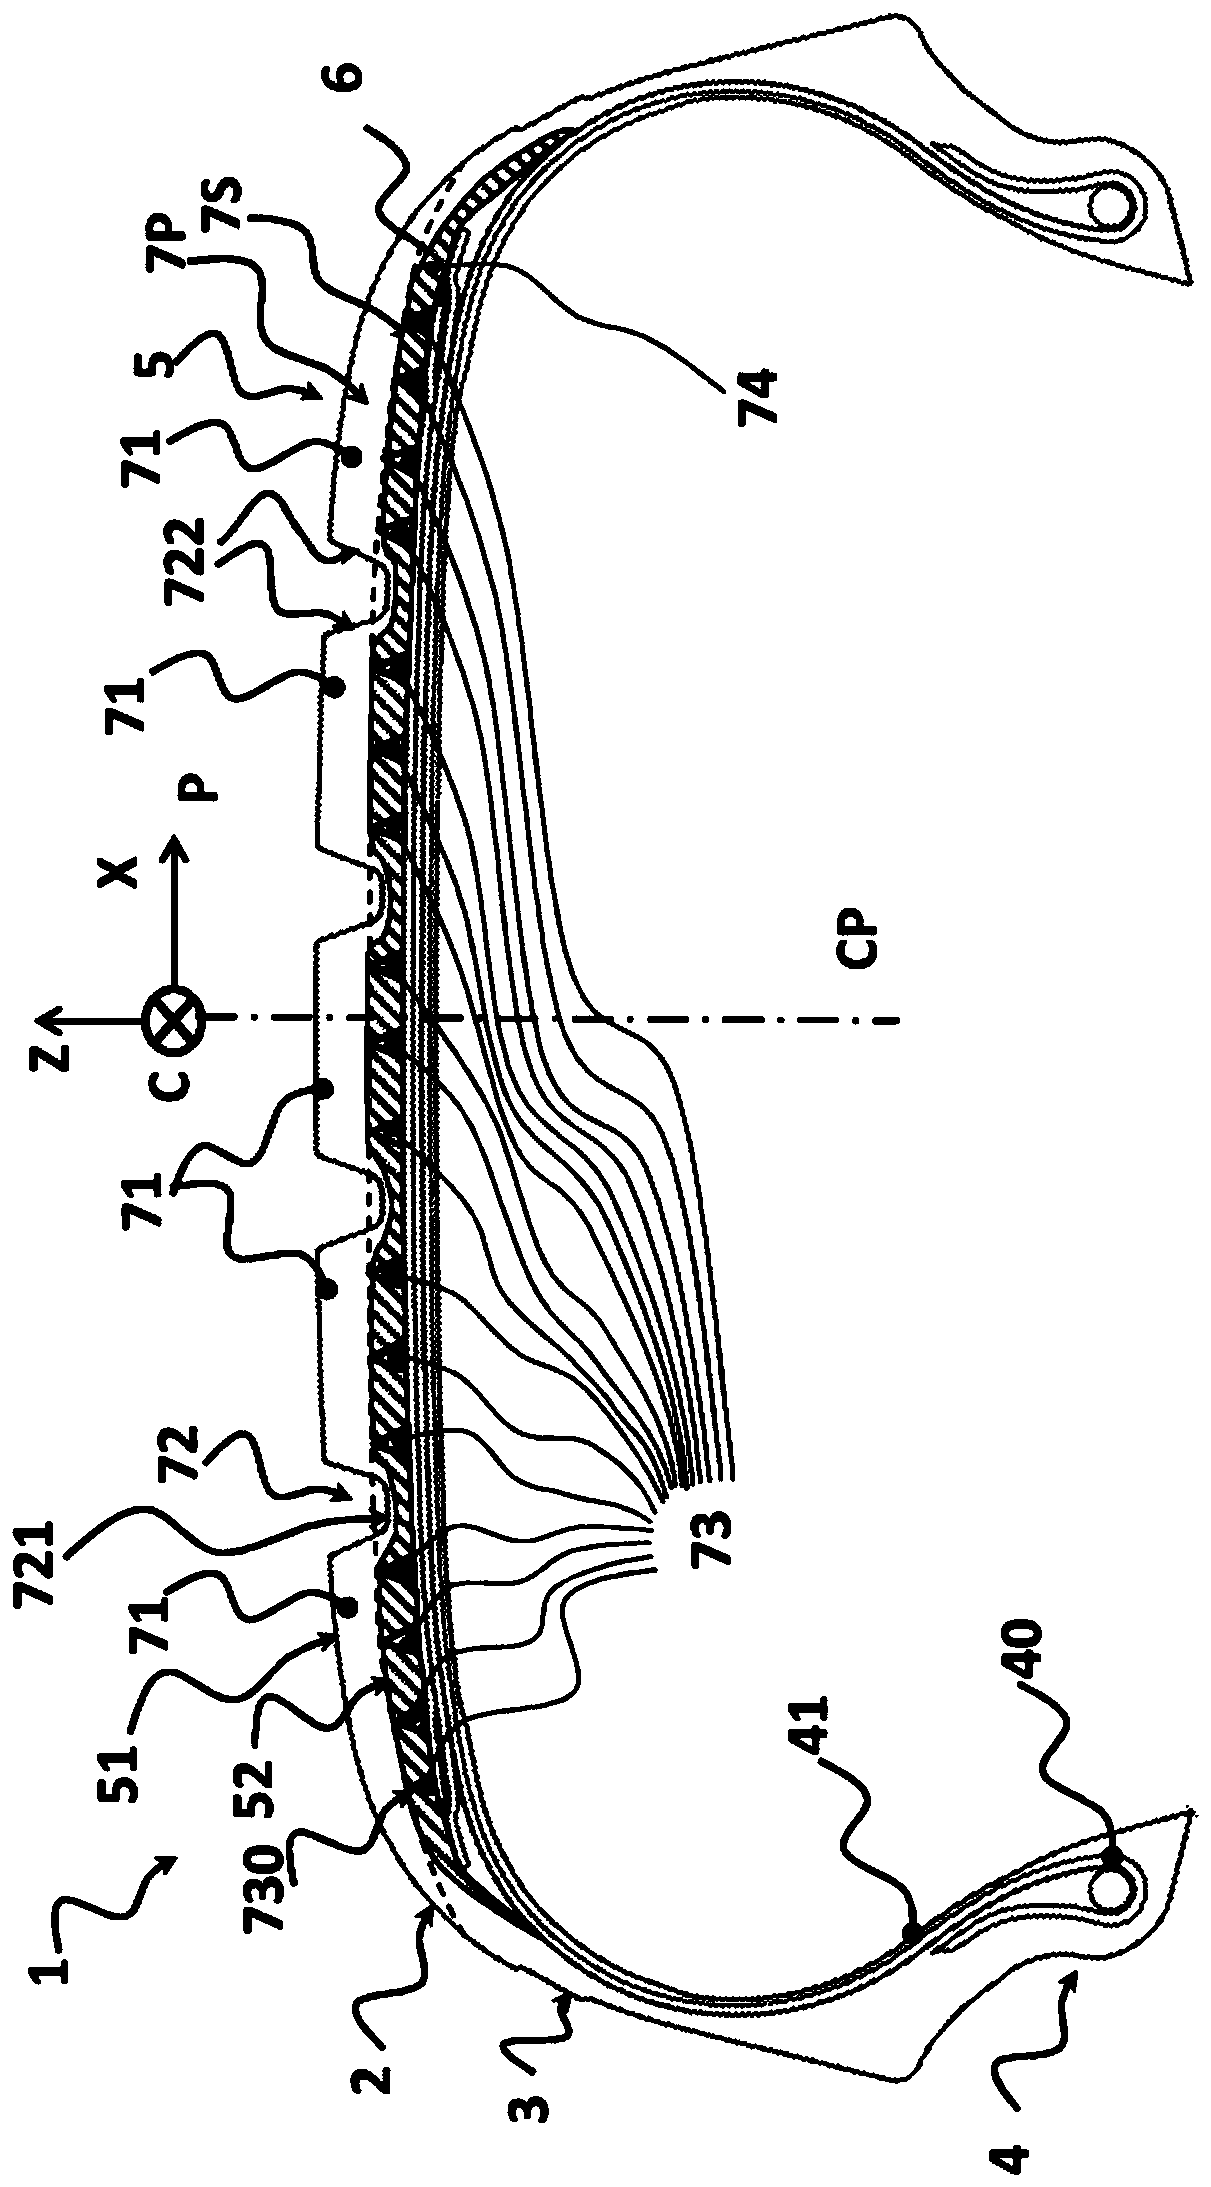 Tyre comprising a tread containing circumferential reinforcing elements in the sublayer